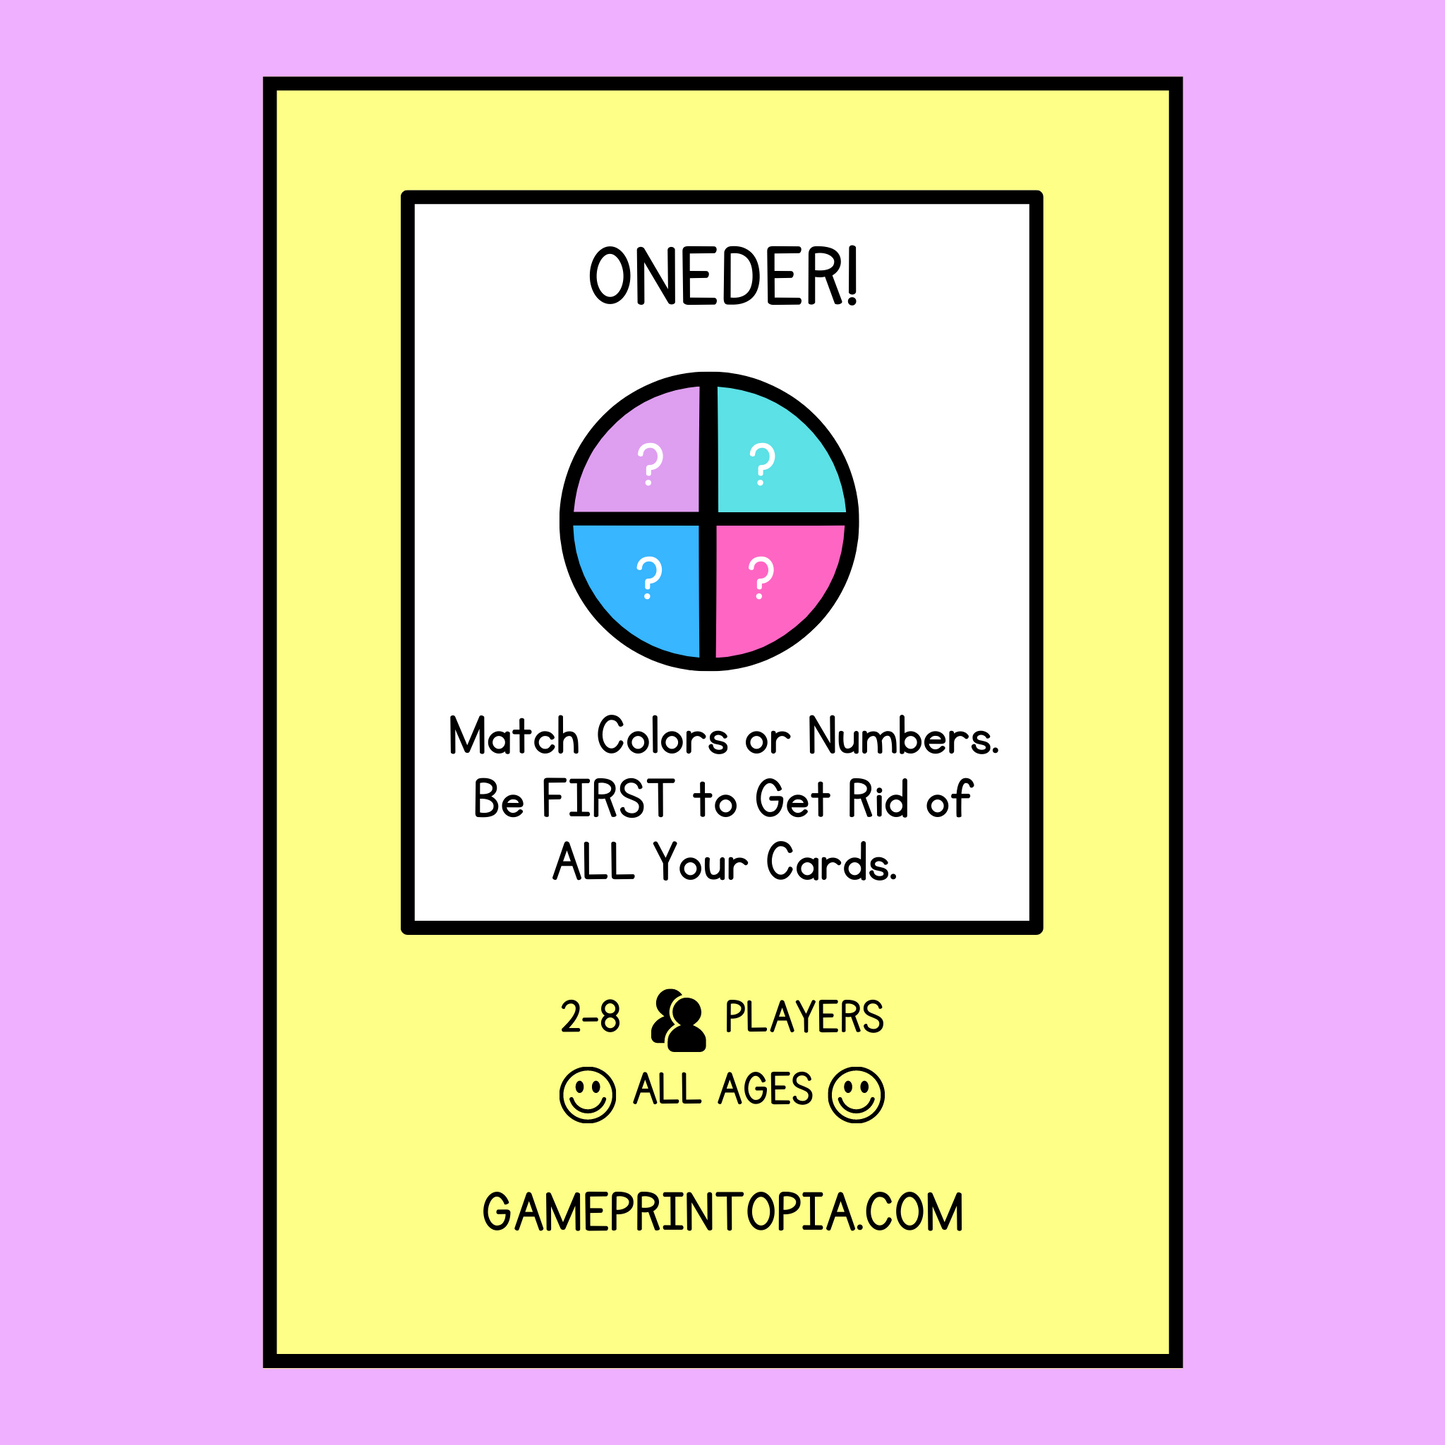 Cover image of the "print and play" party card game ONEDER!, by Gameprintopi